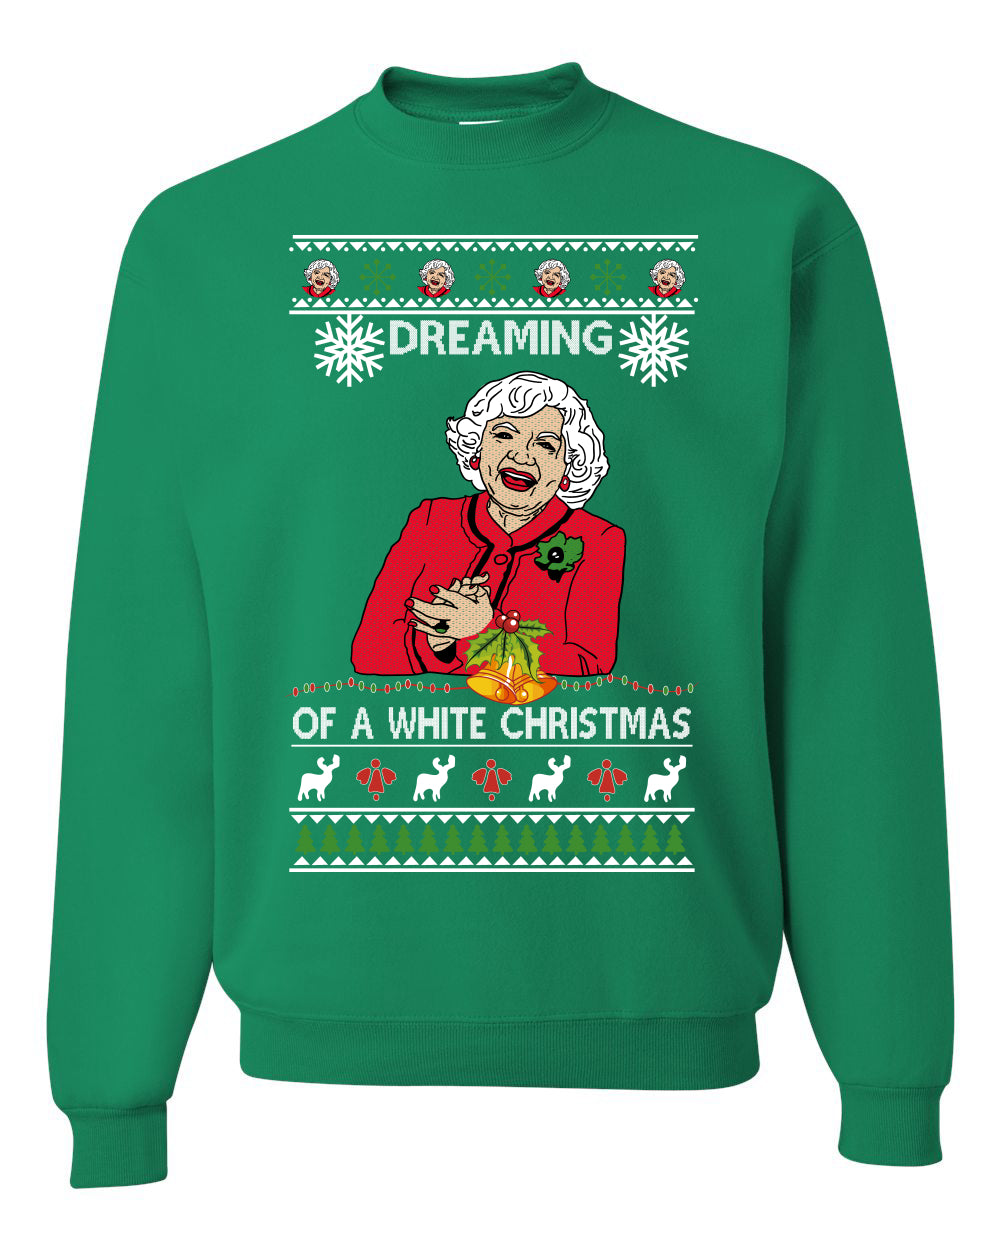 Betty White I'm Dreaming of a White Christmas Ugly Christmas Sweater Unisex Crewneck Graphic Sweatshirt